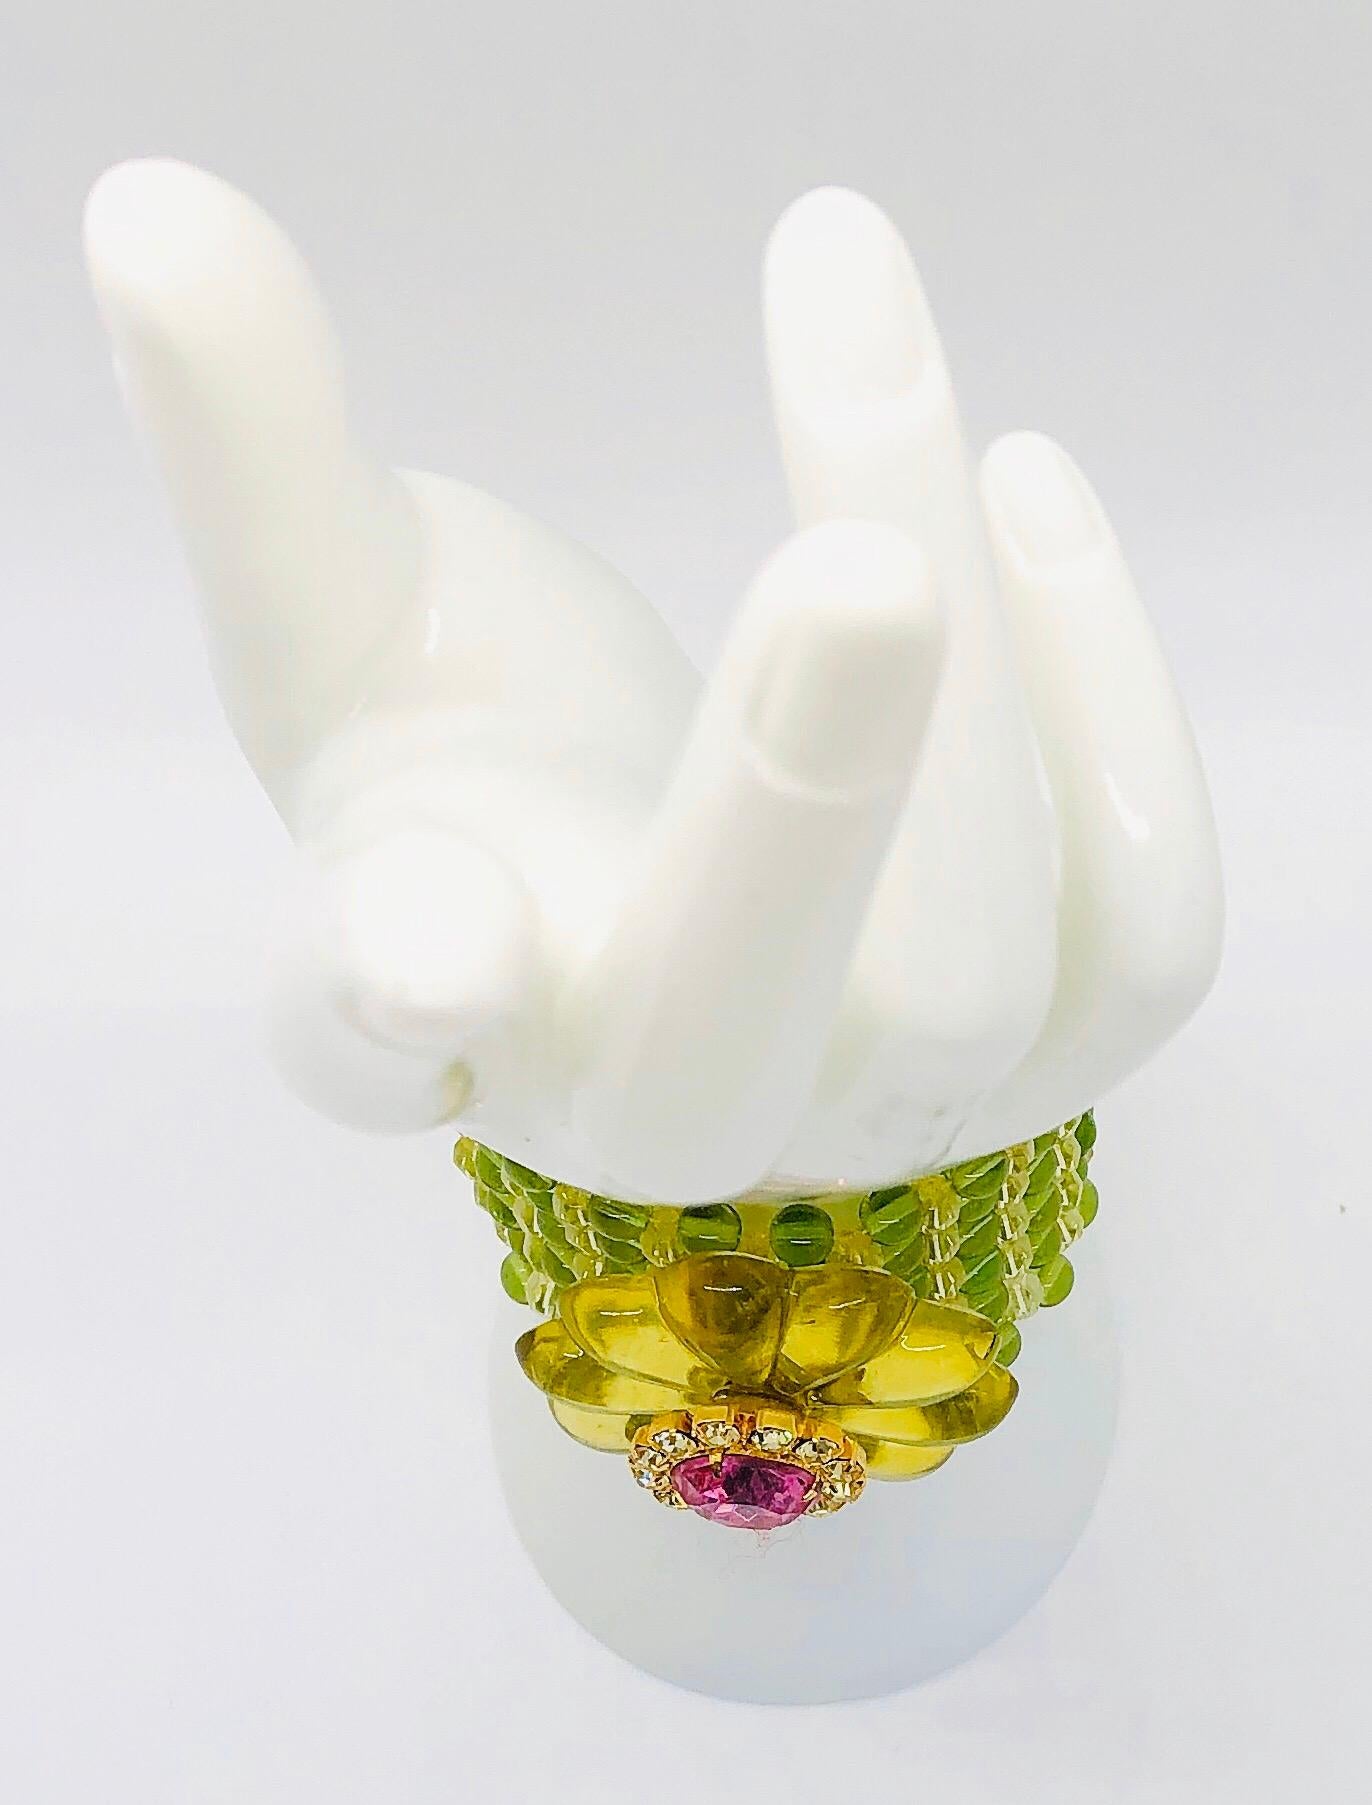 Chic 1960s Neon Lime Green + Hot Pink Lucite Vintage 60s Flower Bracelet Cuff 9